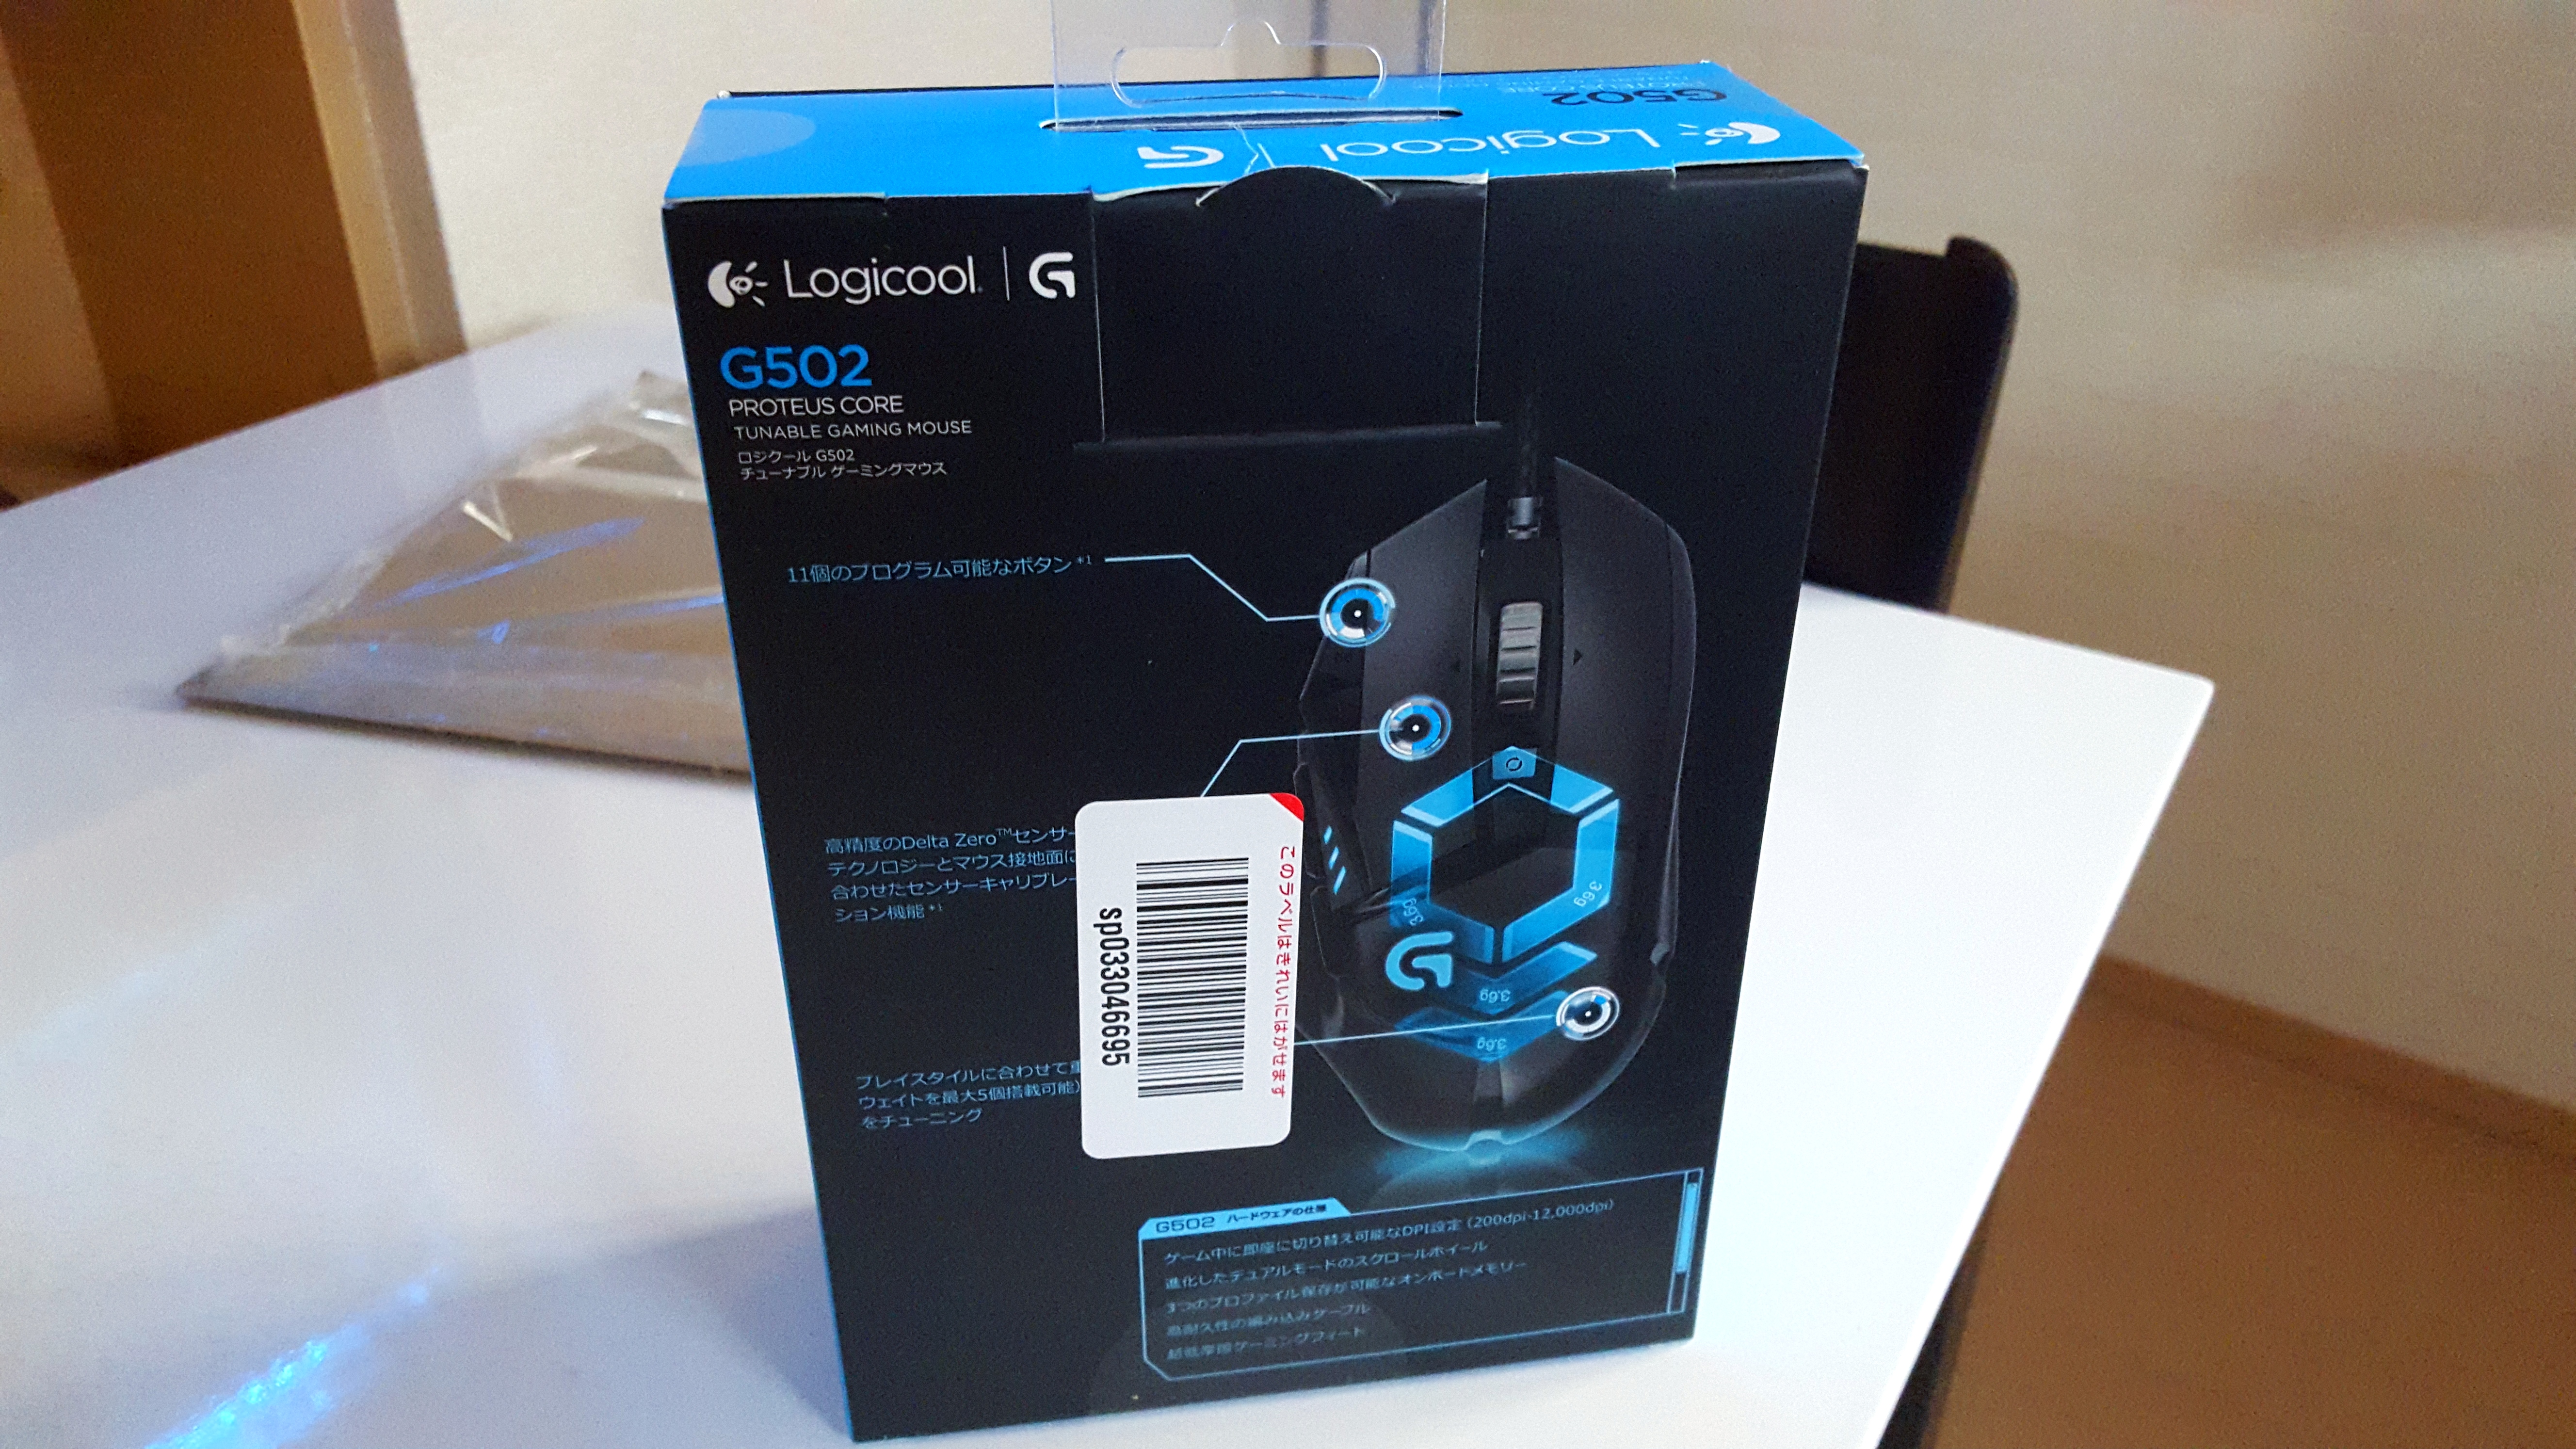 Logitech seems to be called Logicool here in Japan. [Pic inside